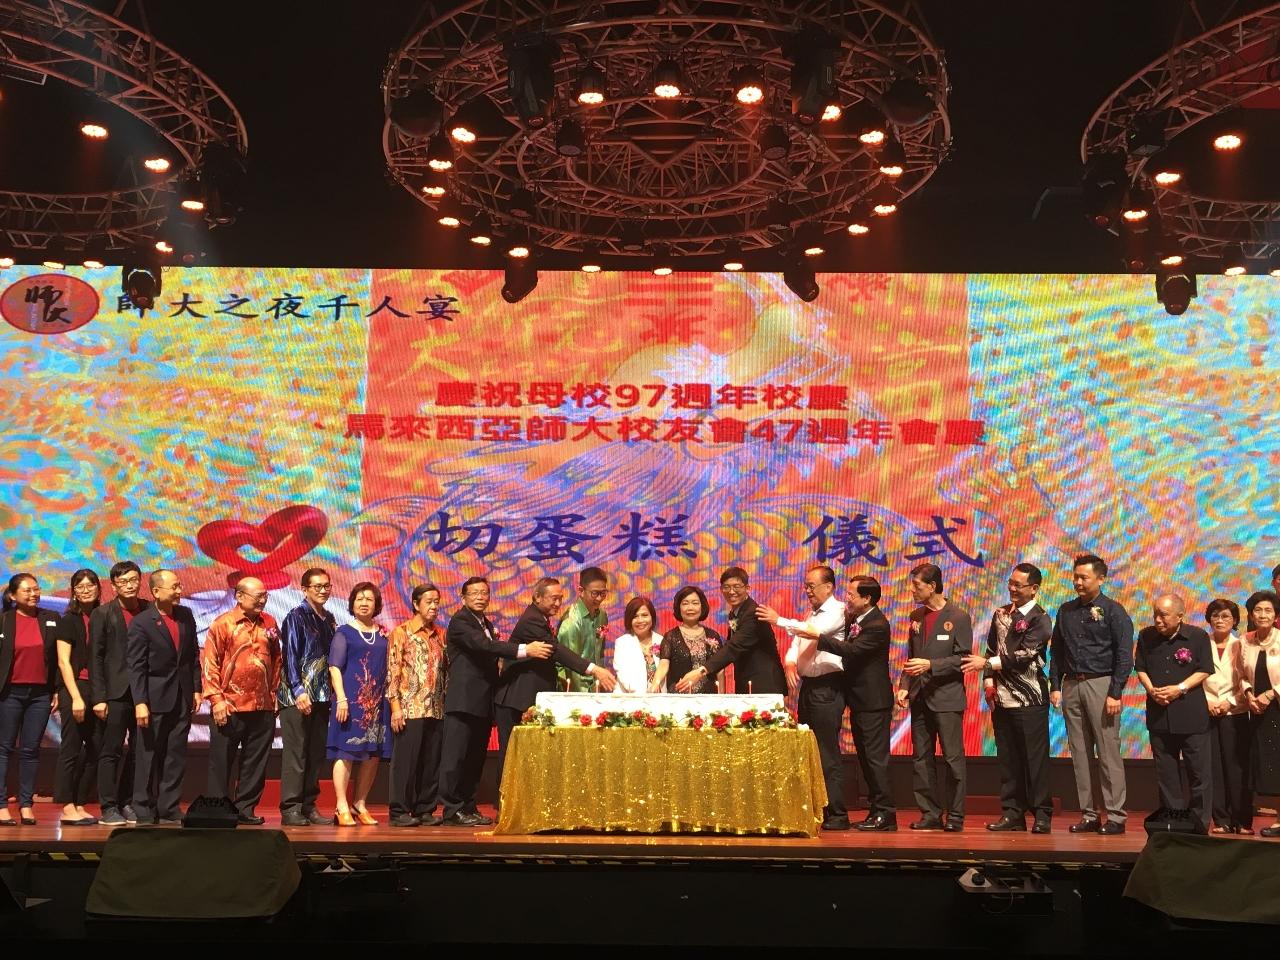 Representative Anne Hung (tenth from right) attends the cake-cutting ceremony of “Thousand People” anniversary dinner hosted by National Taiwan Normal University Alumni Association, Malaysia.